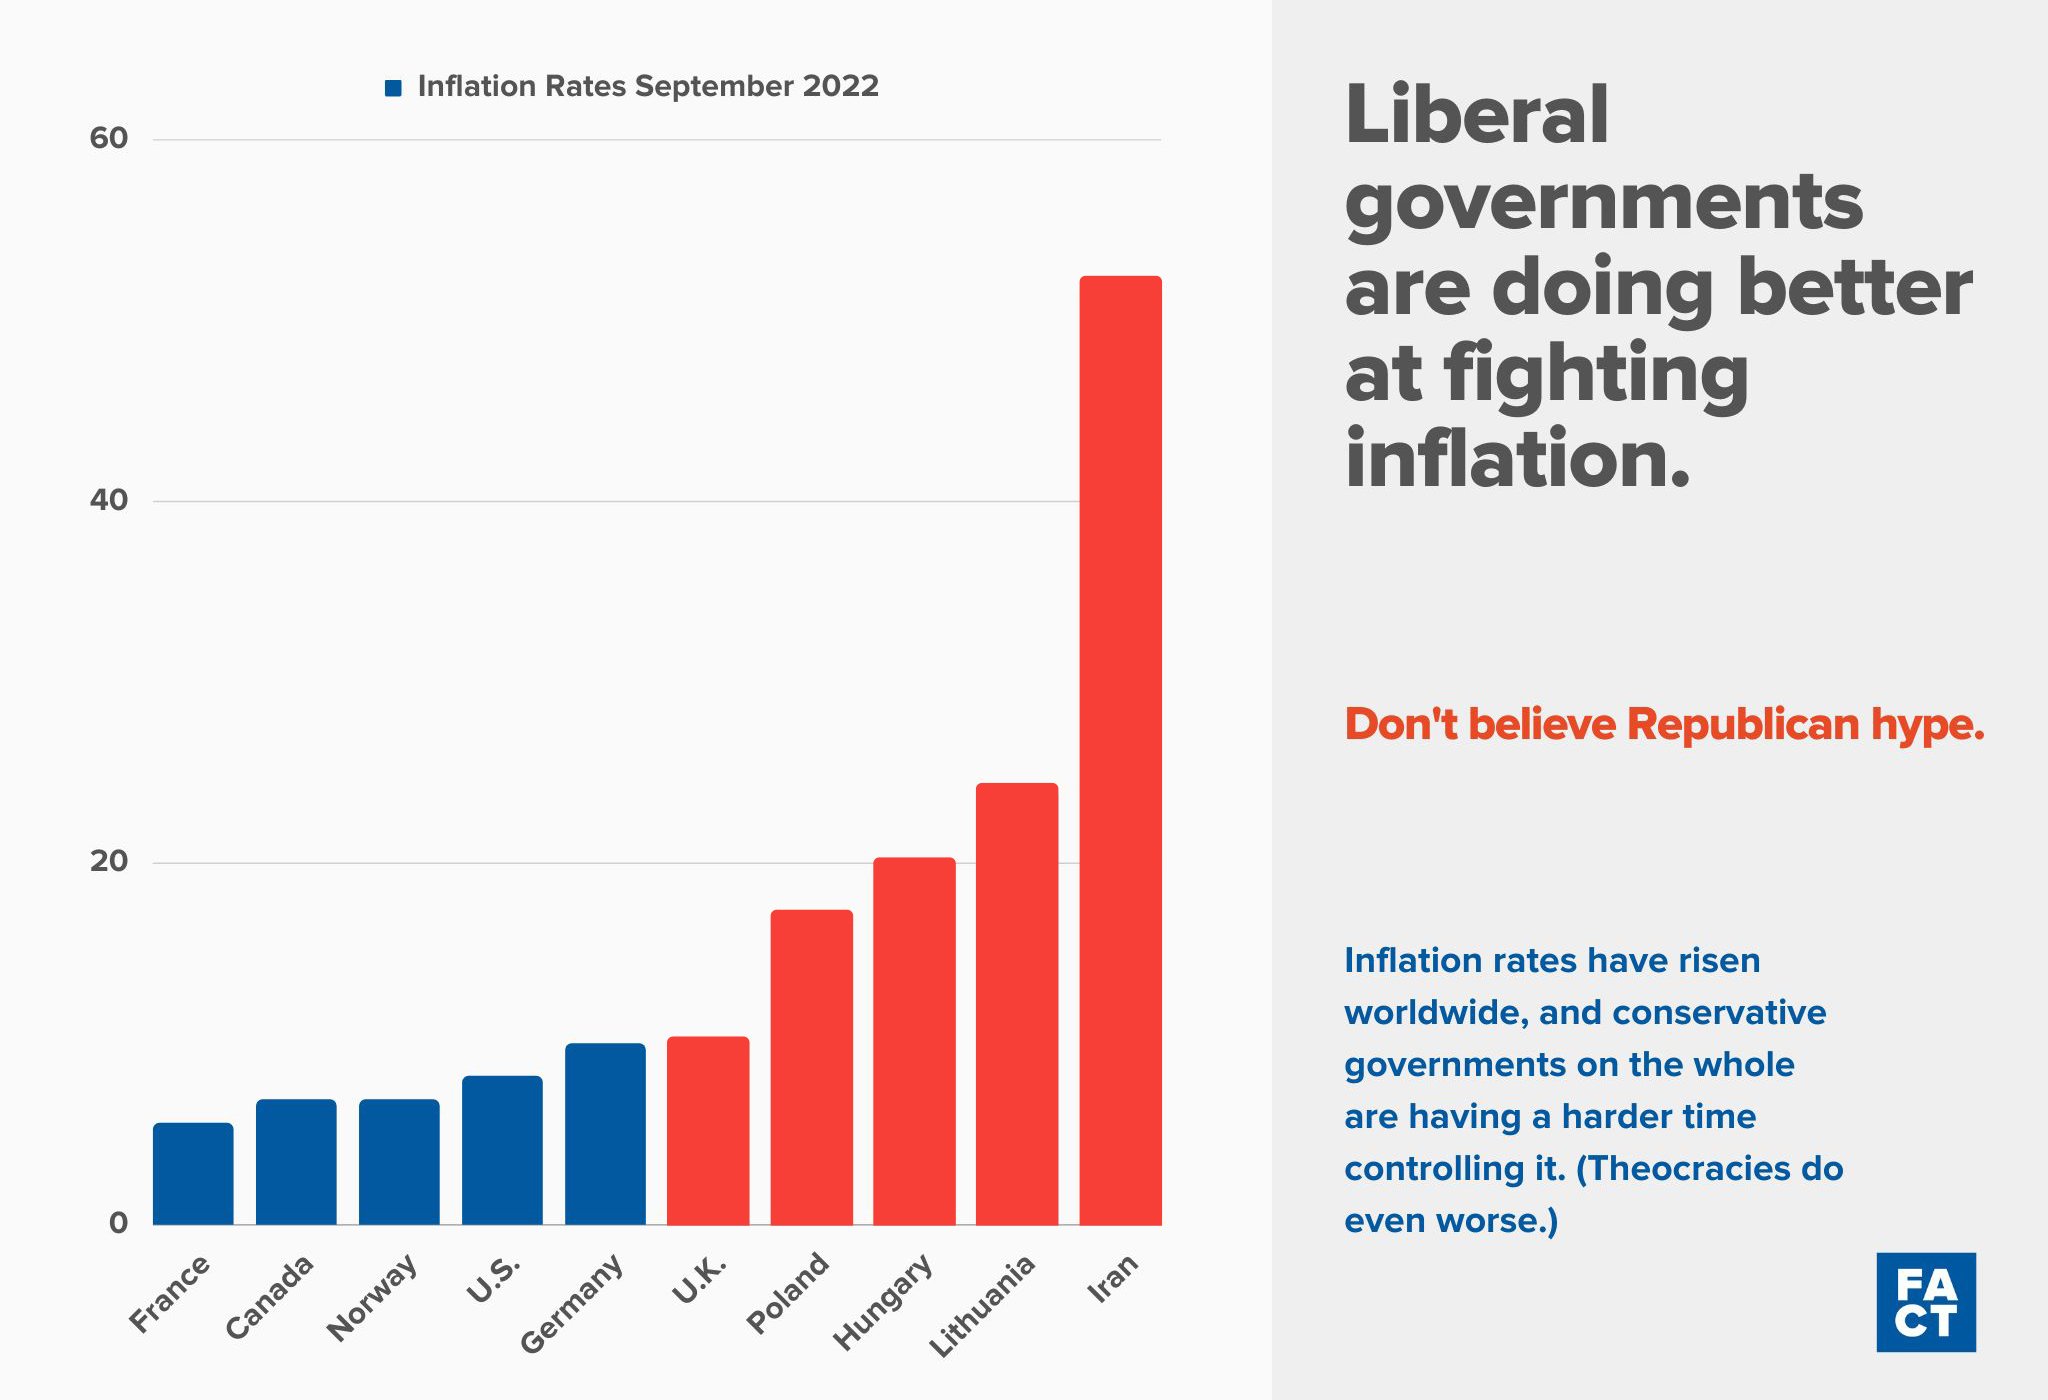 Liberal governments have lower inflation rates